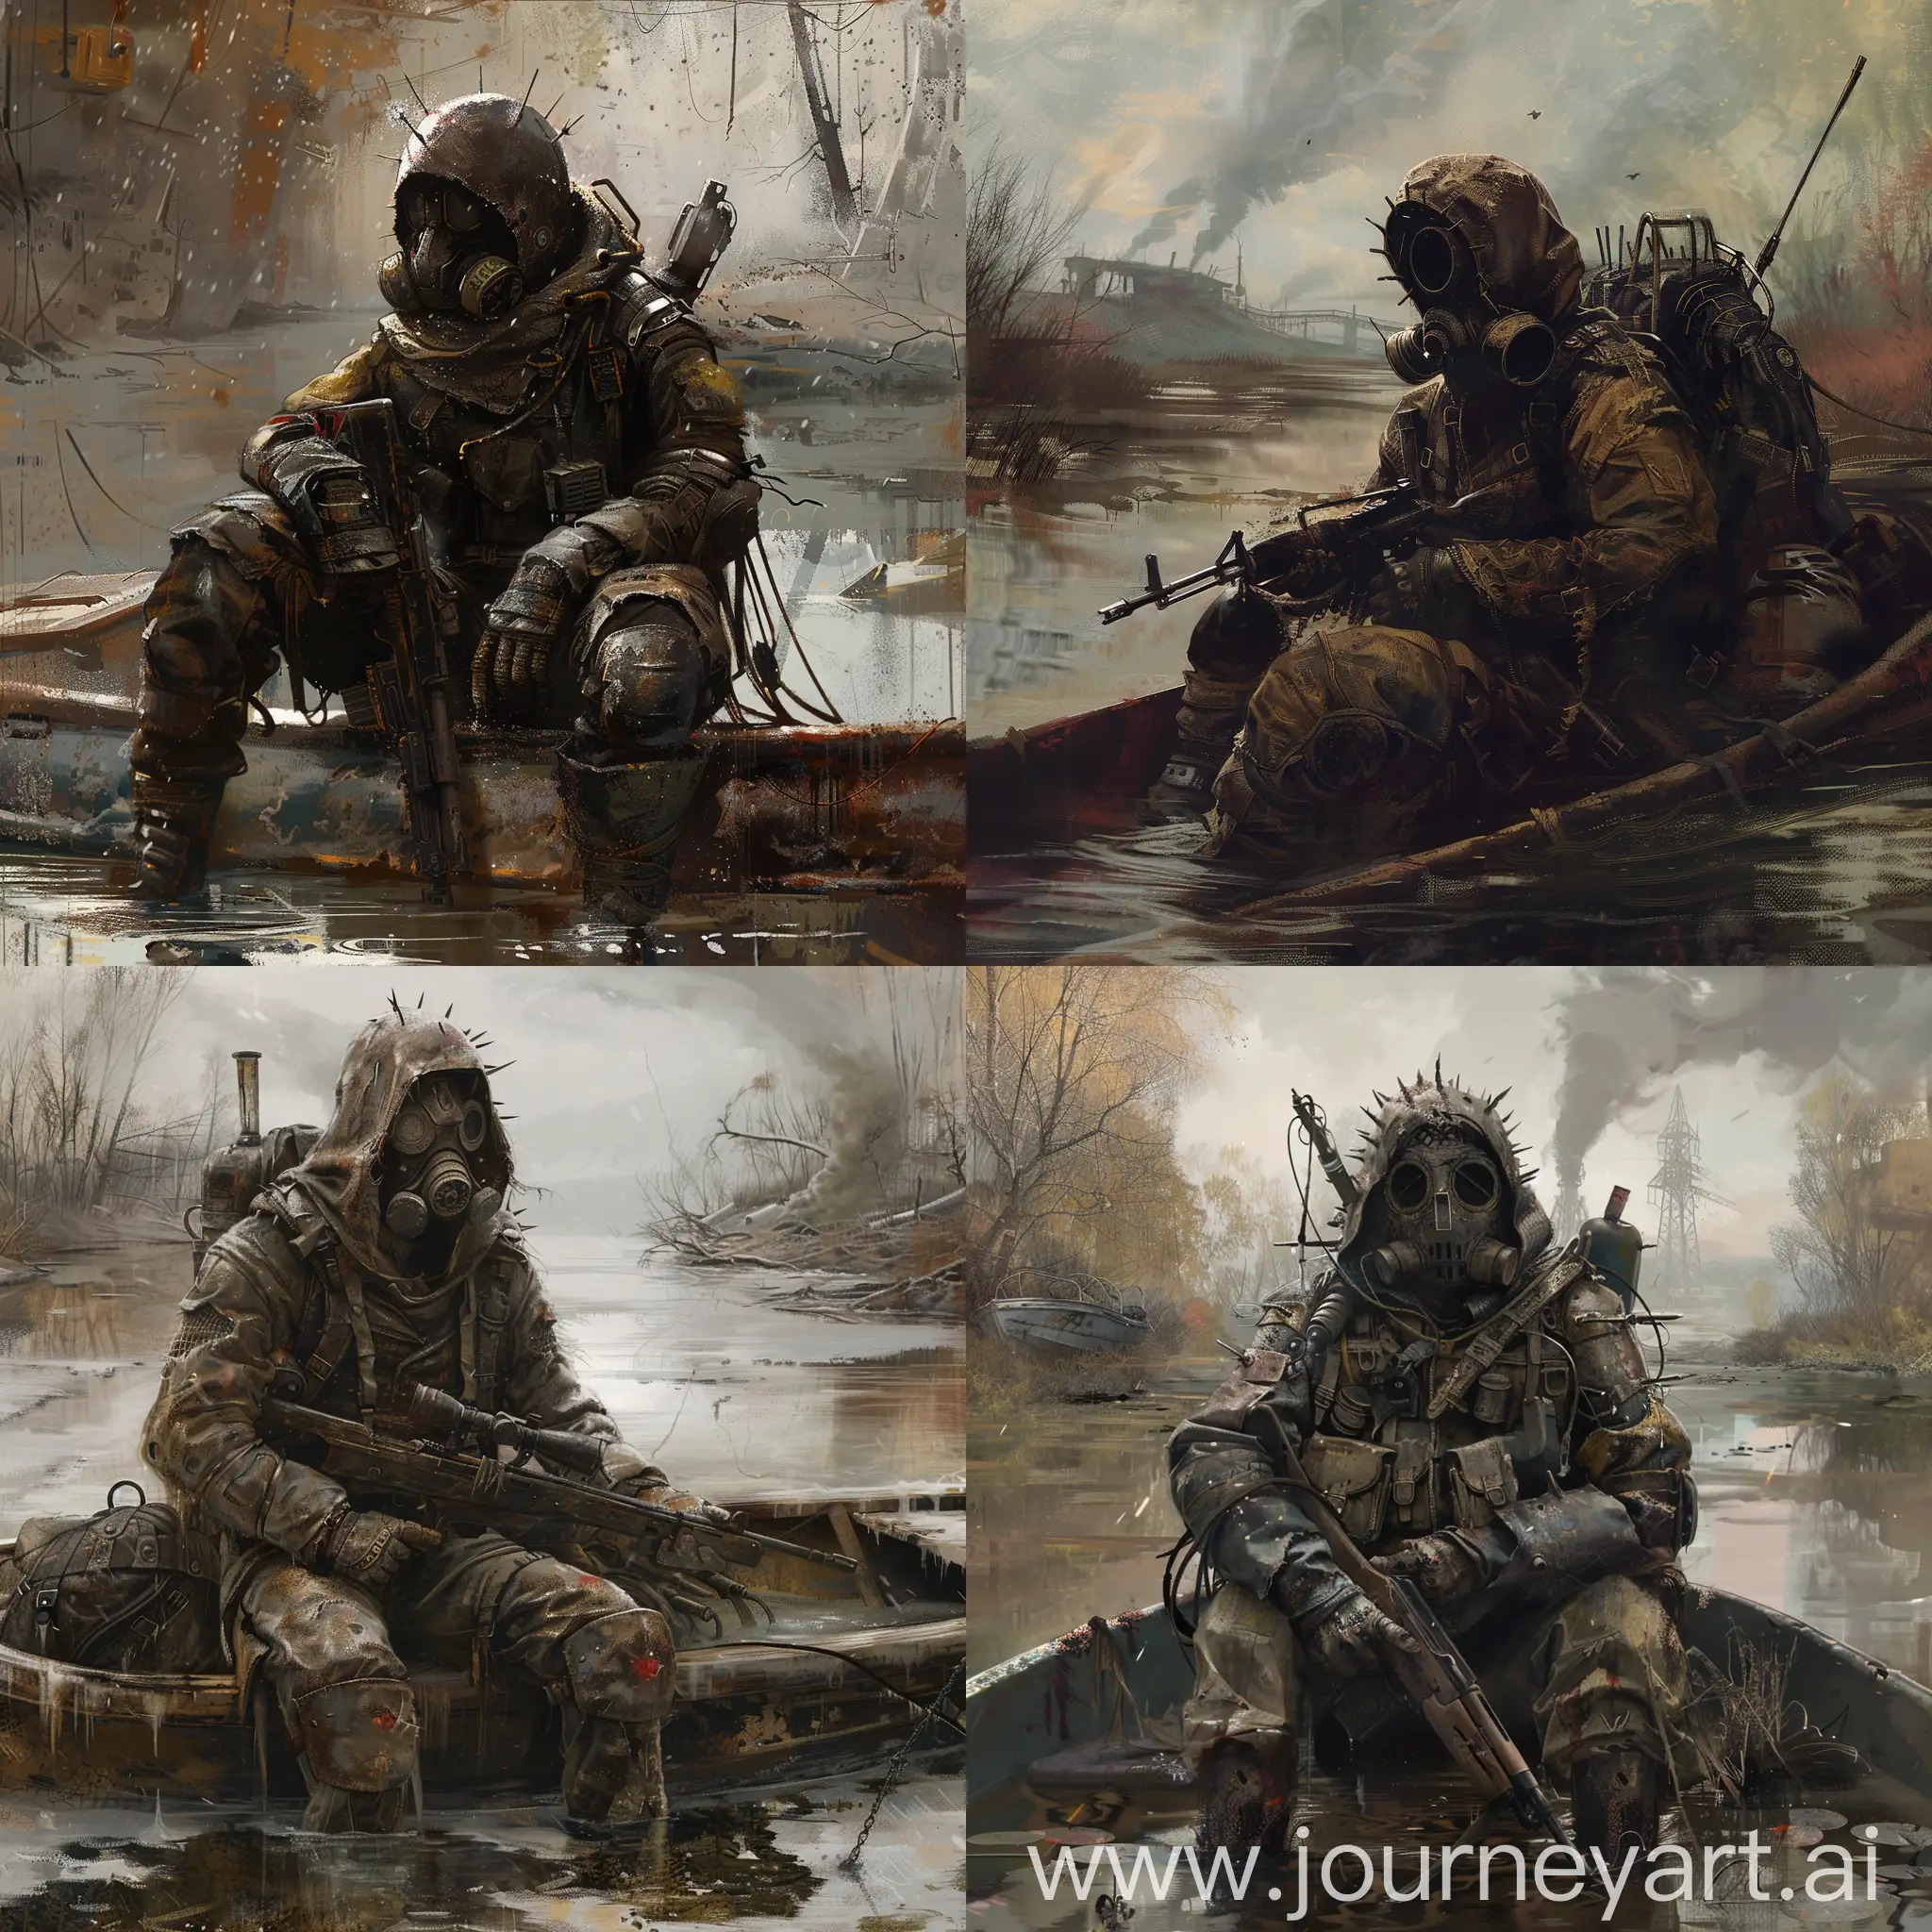 Art for the game Metro 2033, stalker in a slightly torn and worn jumpsuit with a metal bib and other homemade protective equipment all over his body, in a gas mask, on his head he has a helmet with spikes, in his hands he has a sniper rifle, on his back a small backpack, stalker sits in a boat, Dead radioactive Moscow, location radioactive swamp autumn with snow that has not yet completely melted.